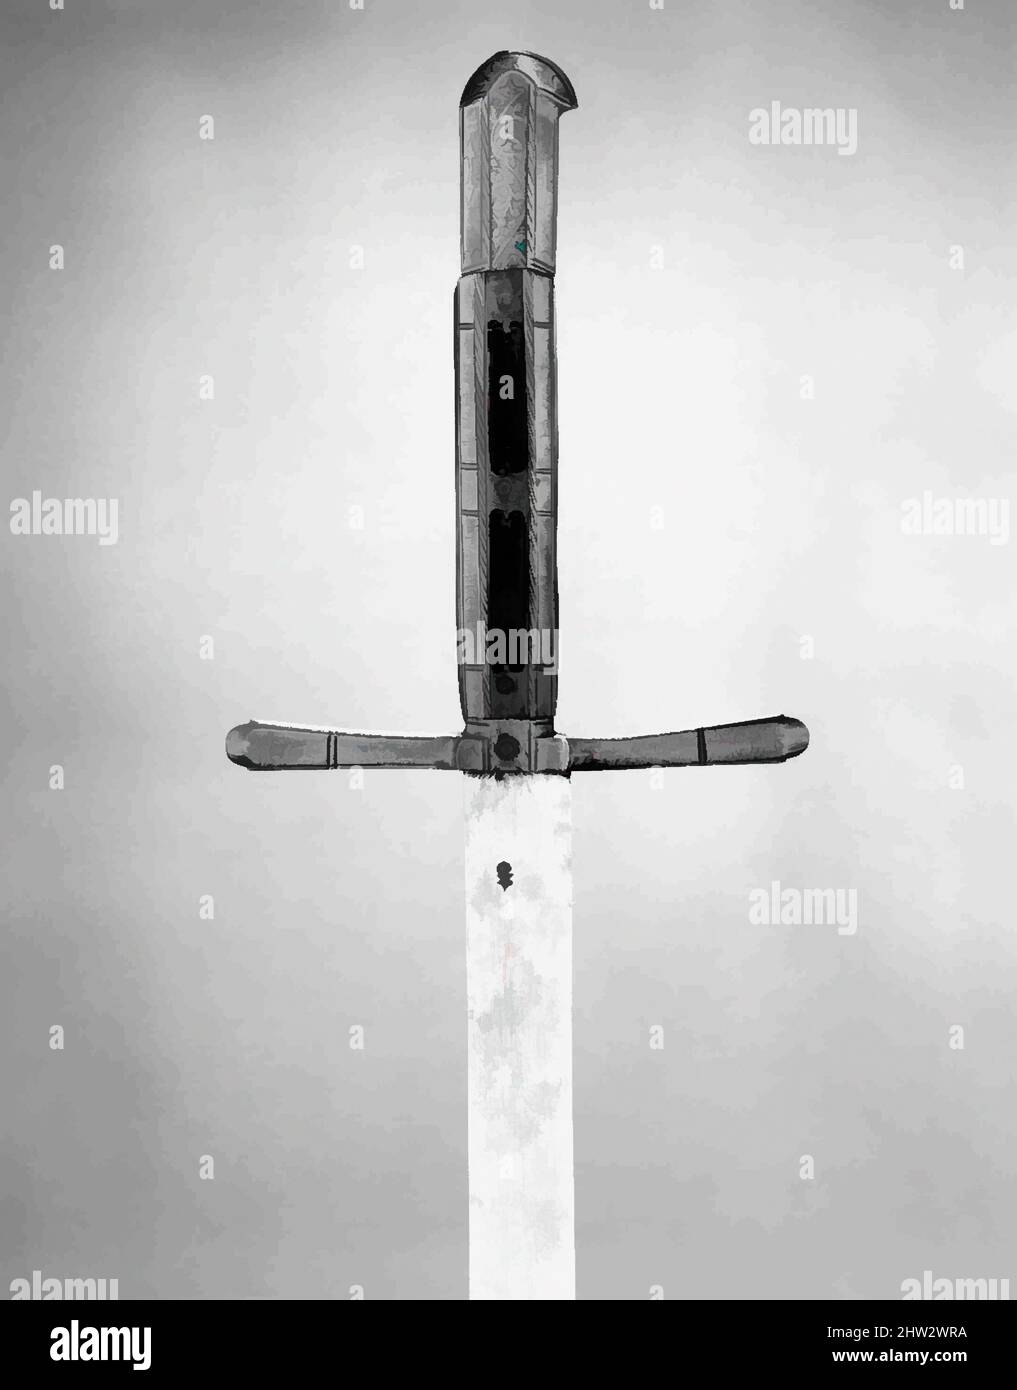 Art inspired by Hunting Sword, ca. 1500, Hall, Tyrol, Austrian, Hall, Steel, copper alloy, horn, bone, L. 49 1/2 in. (125.7 cm); L. of blade 40 in. (101.6 cm); W. of blade 1 7/16 in. (3.6 cm); Wt. 3 ls. 9 oz. (1615.9 g), Swords, Designed as a defense against large game, such as bear, Classic works modernized by Artotop with a splash of modernity. Shapes, color and value, eye-catching visual impact on art. Emotions through freedom of artworks in a contemporary way. A timeless message pursuing a wildly creative new direction. Artists turning to the digital medium and creating the Artotop NFT Stock Photo